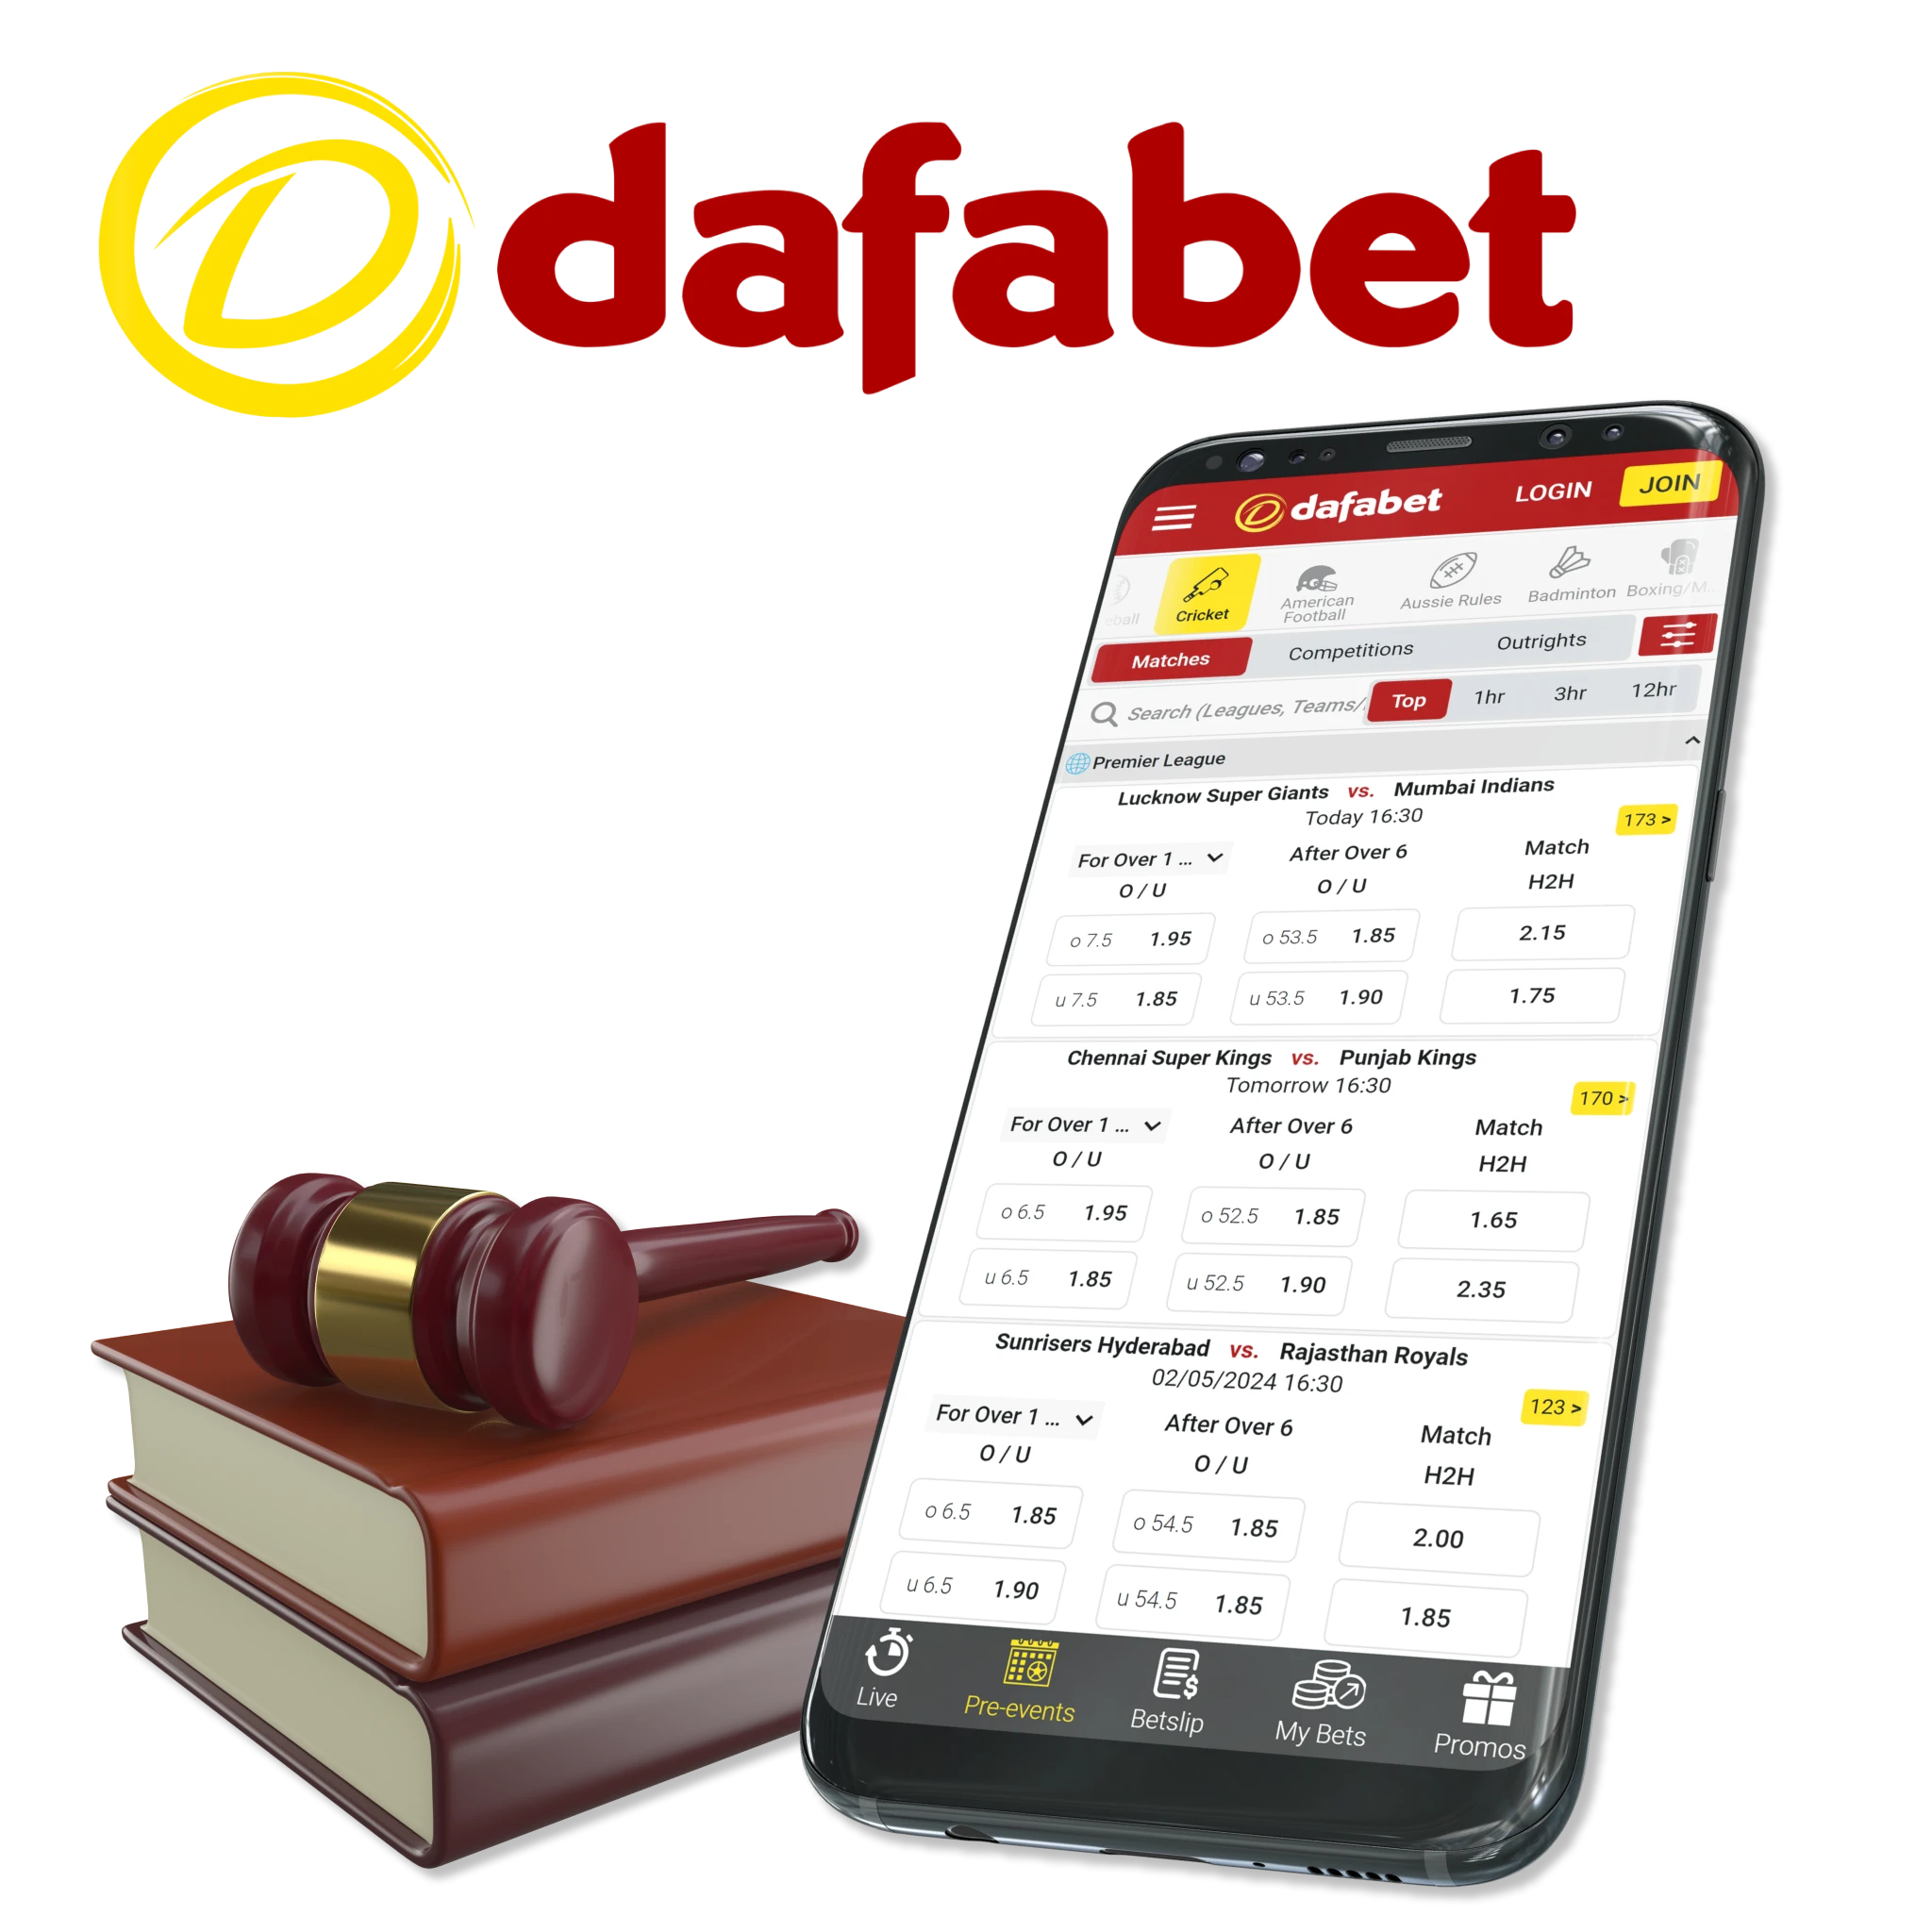 If you want to enjoy and profit from cricket betting, then the Dafabet mobile app is definitely for you.